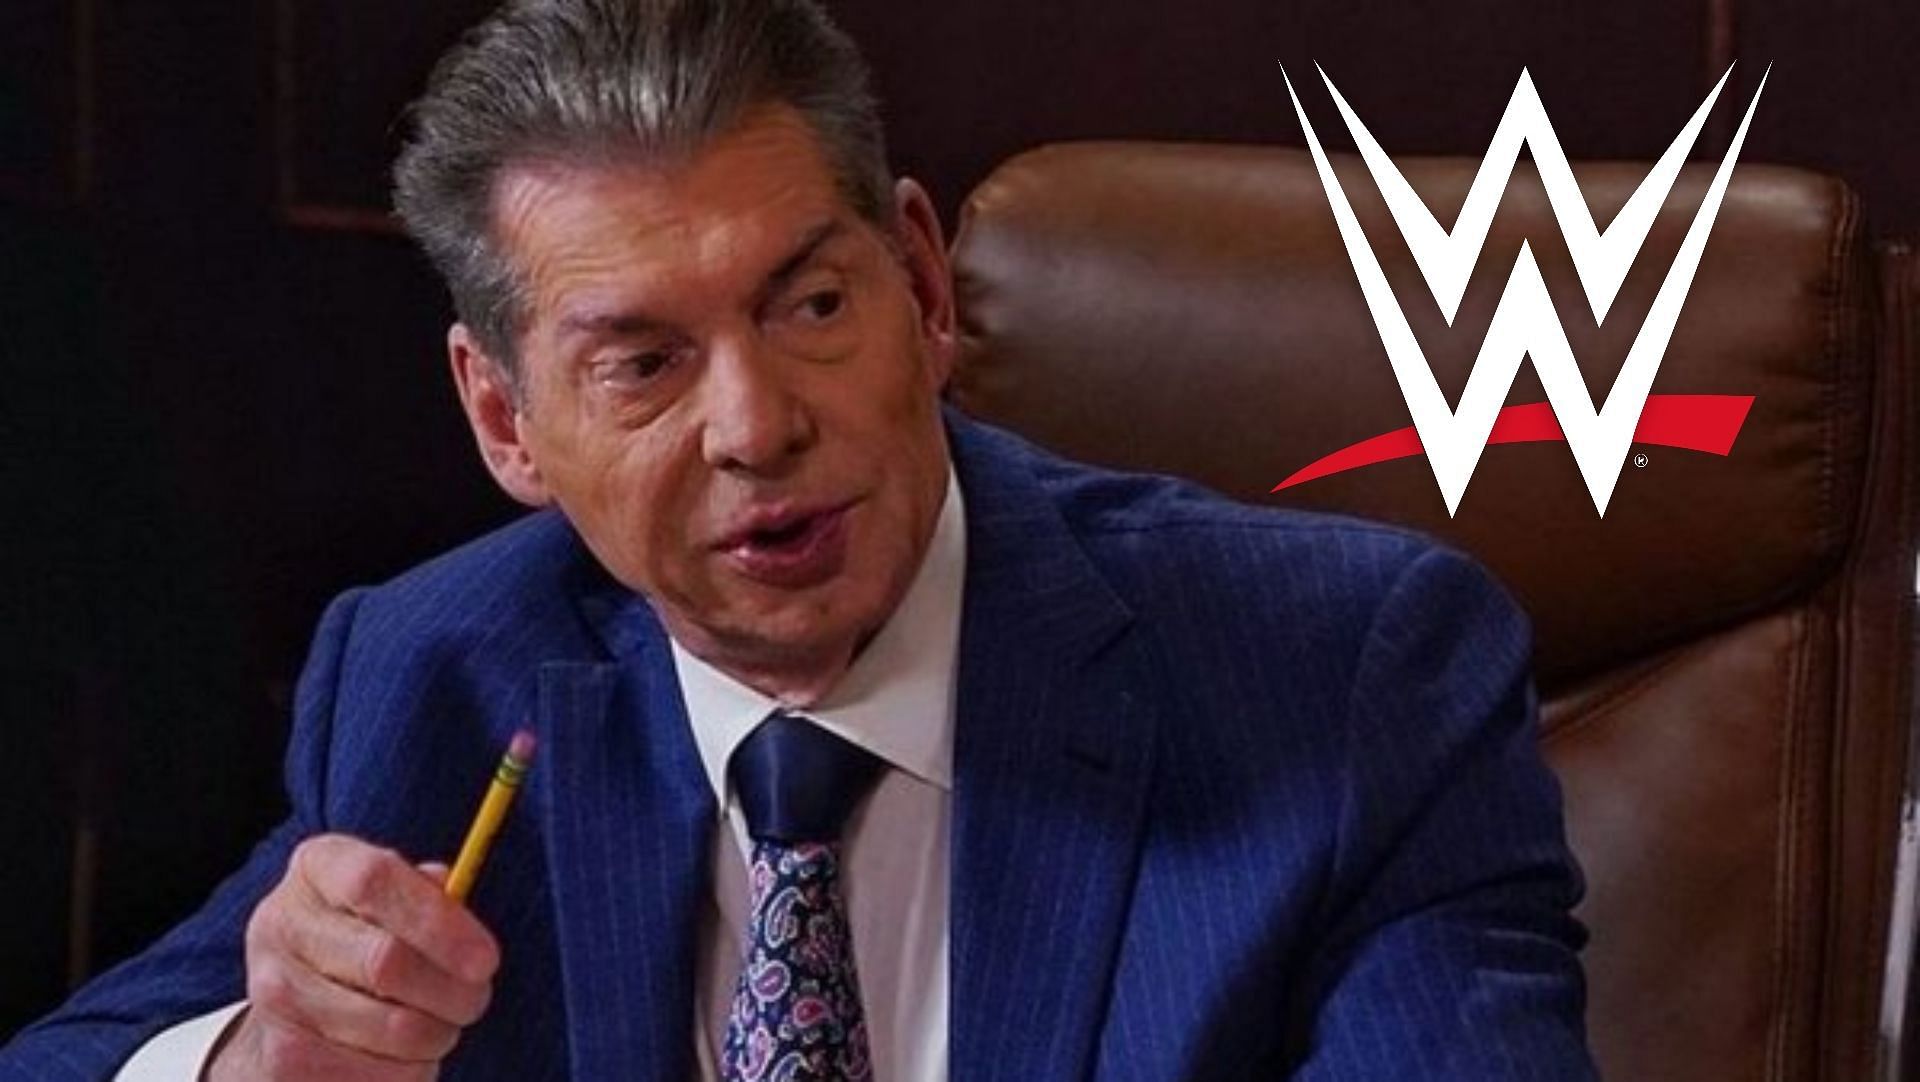 The former chairman retired from WWE last week